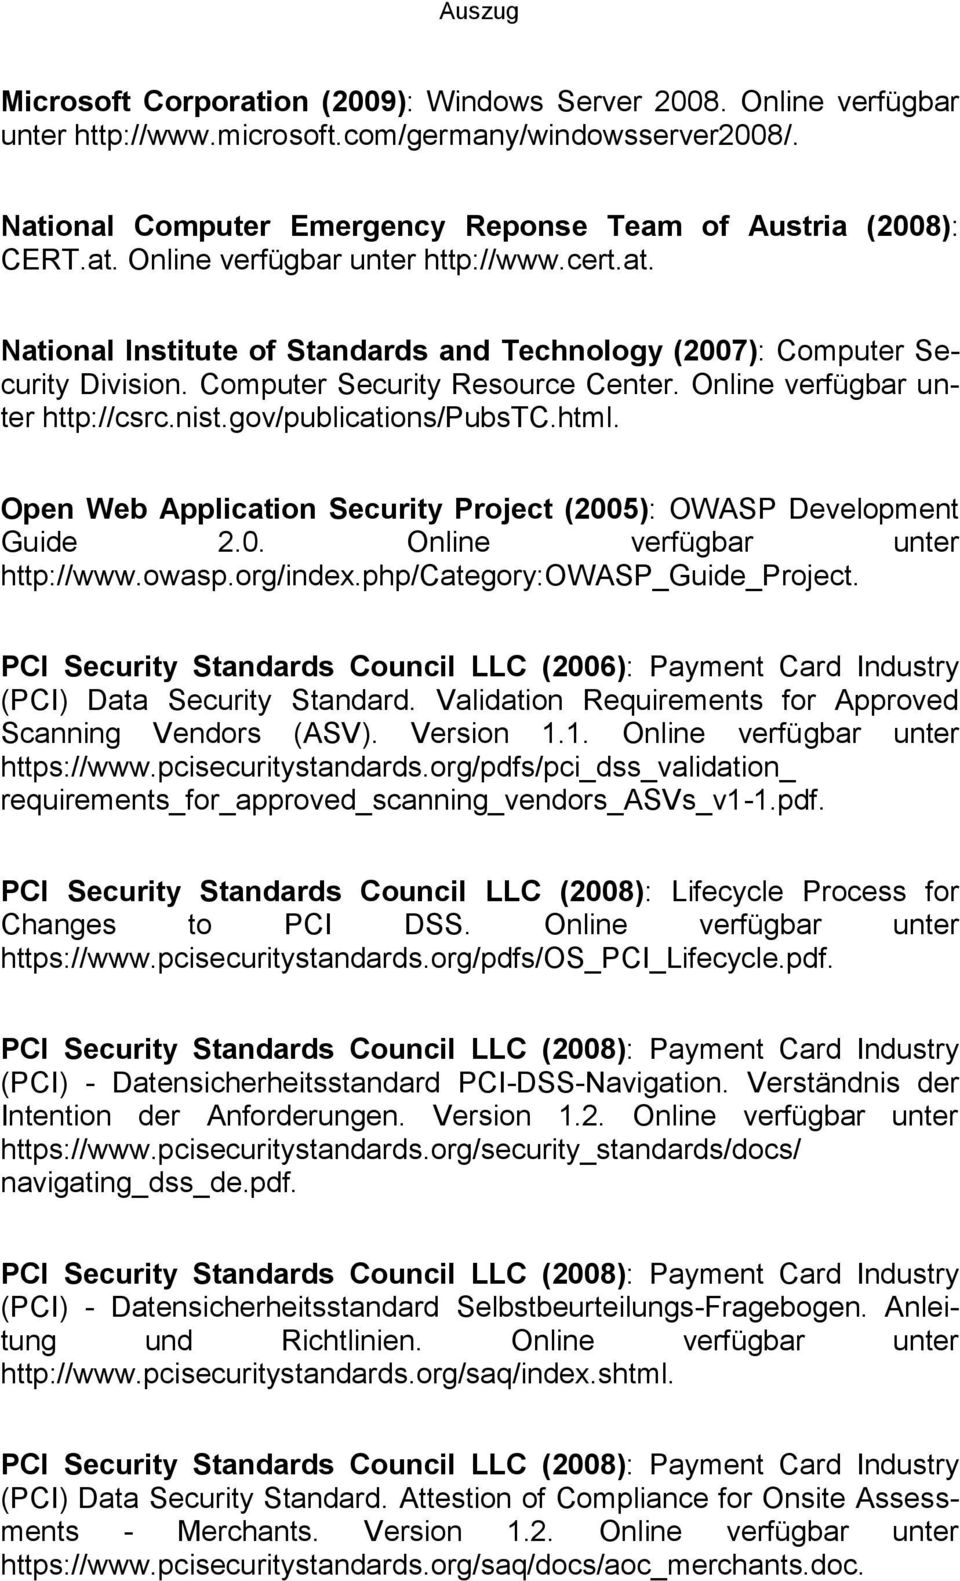 nist.gov/publications/pubstc.html. Open Web Application Security Project (2005): OWASP Development Guide 2.0. Online verfügbar unter http://www.owasp.org/index.php/category:owasp_guide_project.